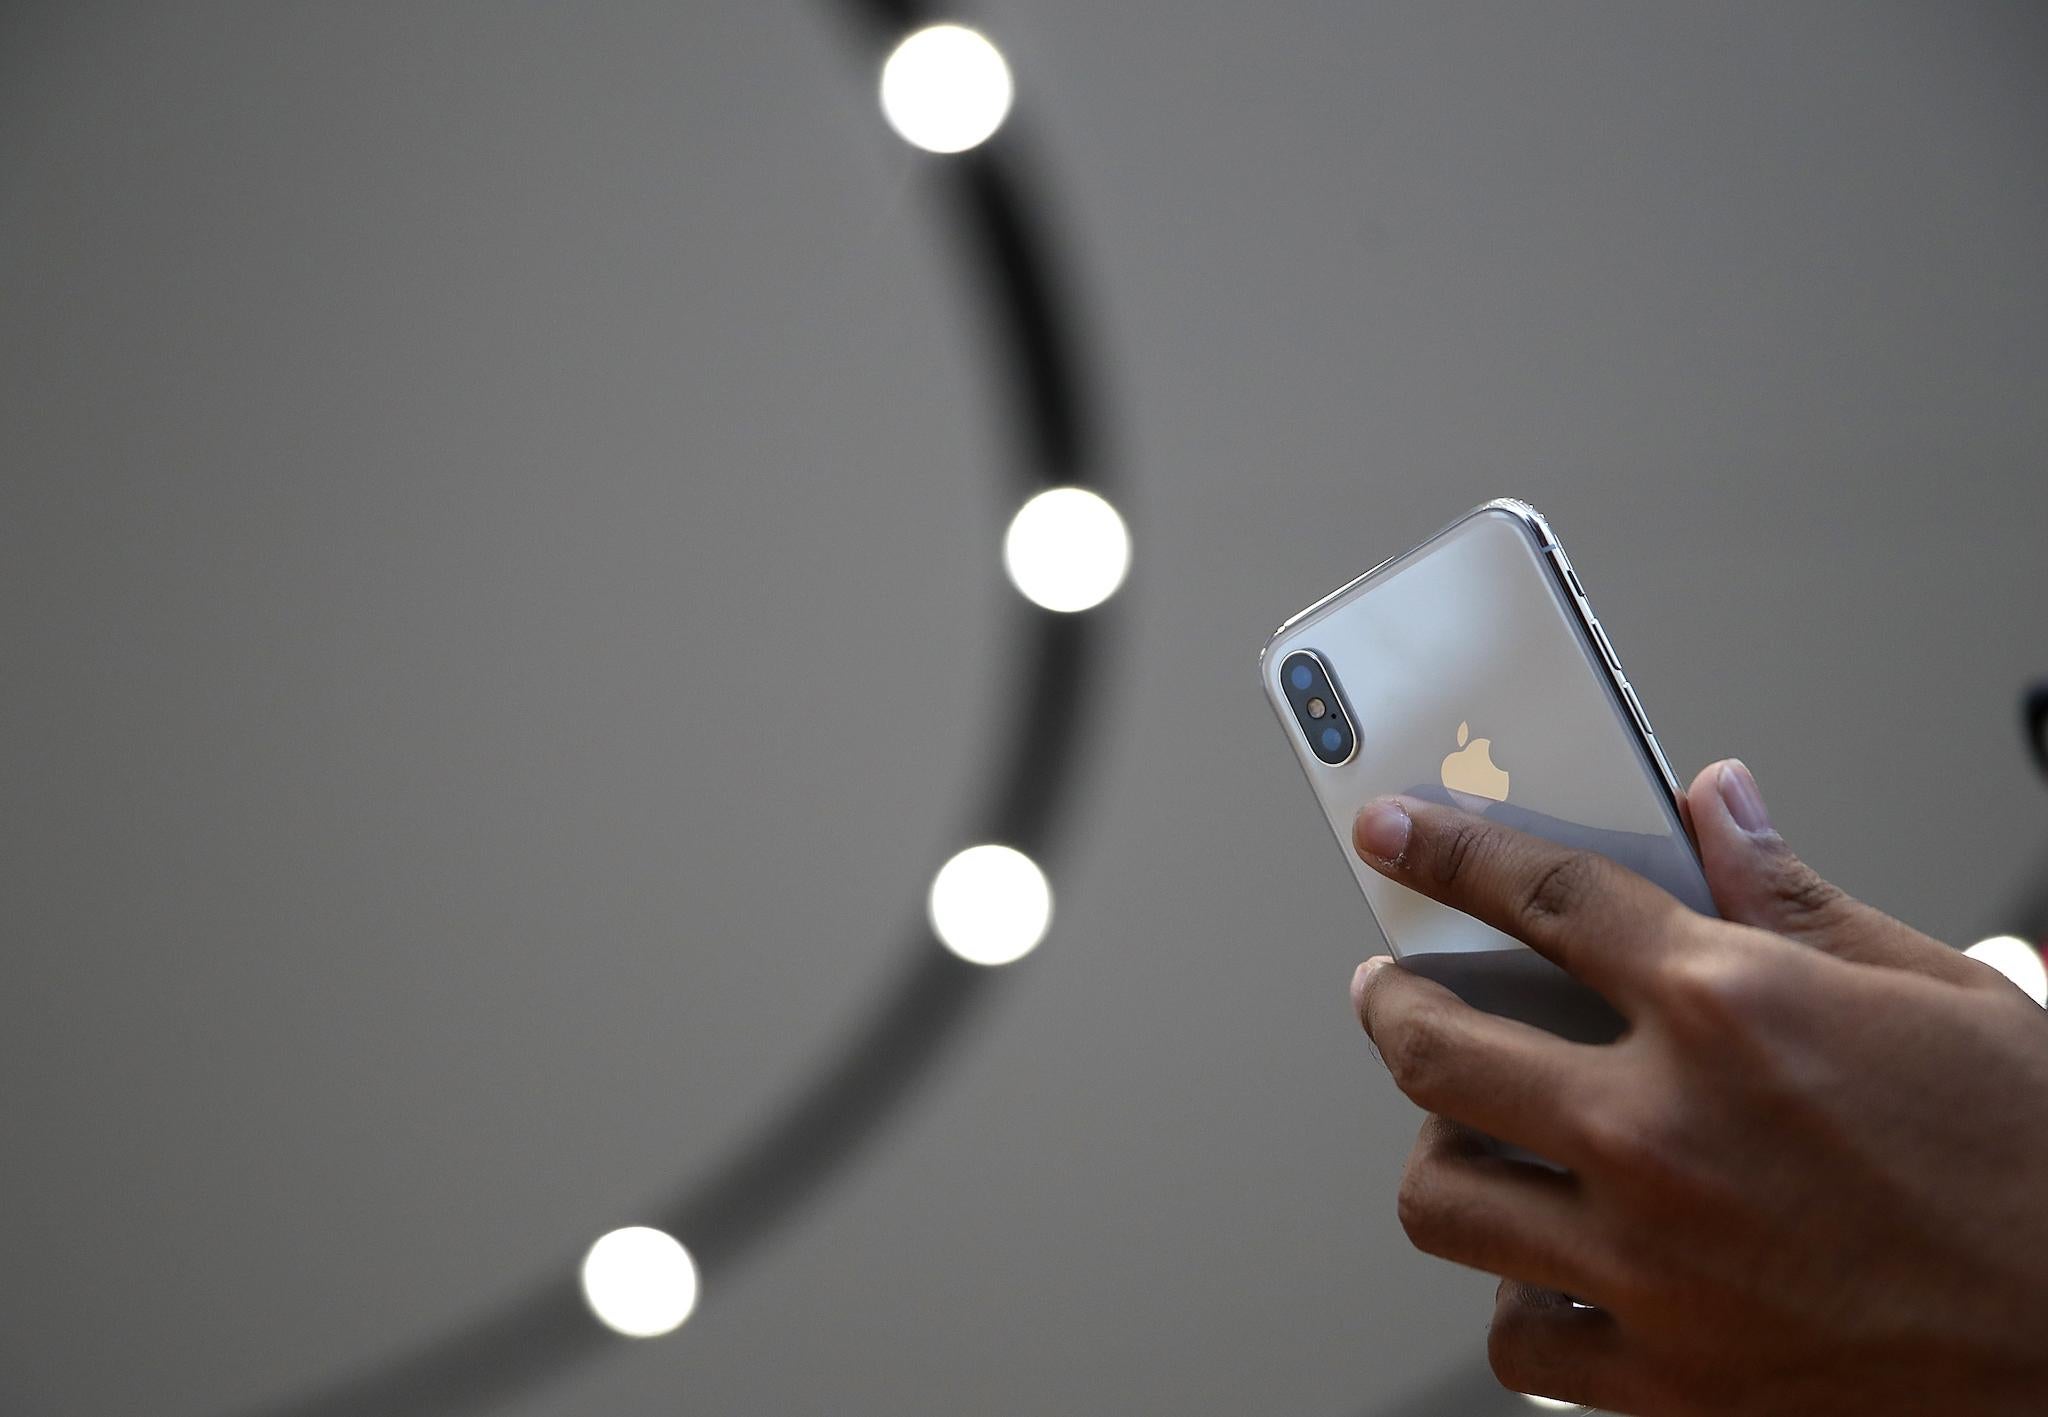 Apple event: Everything you need to know about the iPhone launch